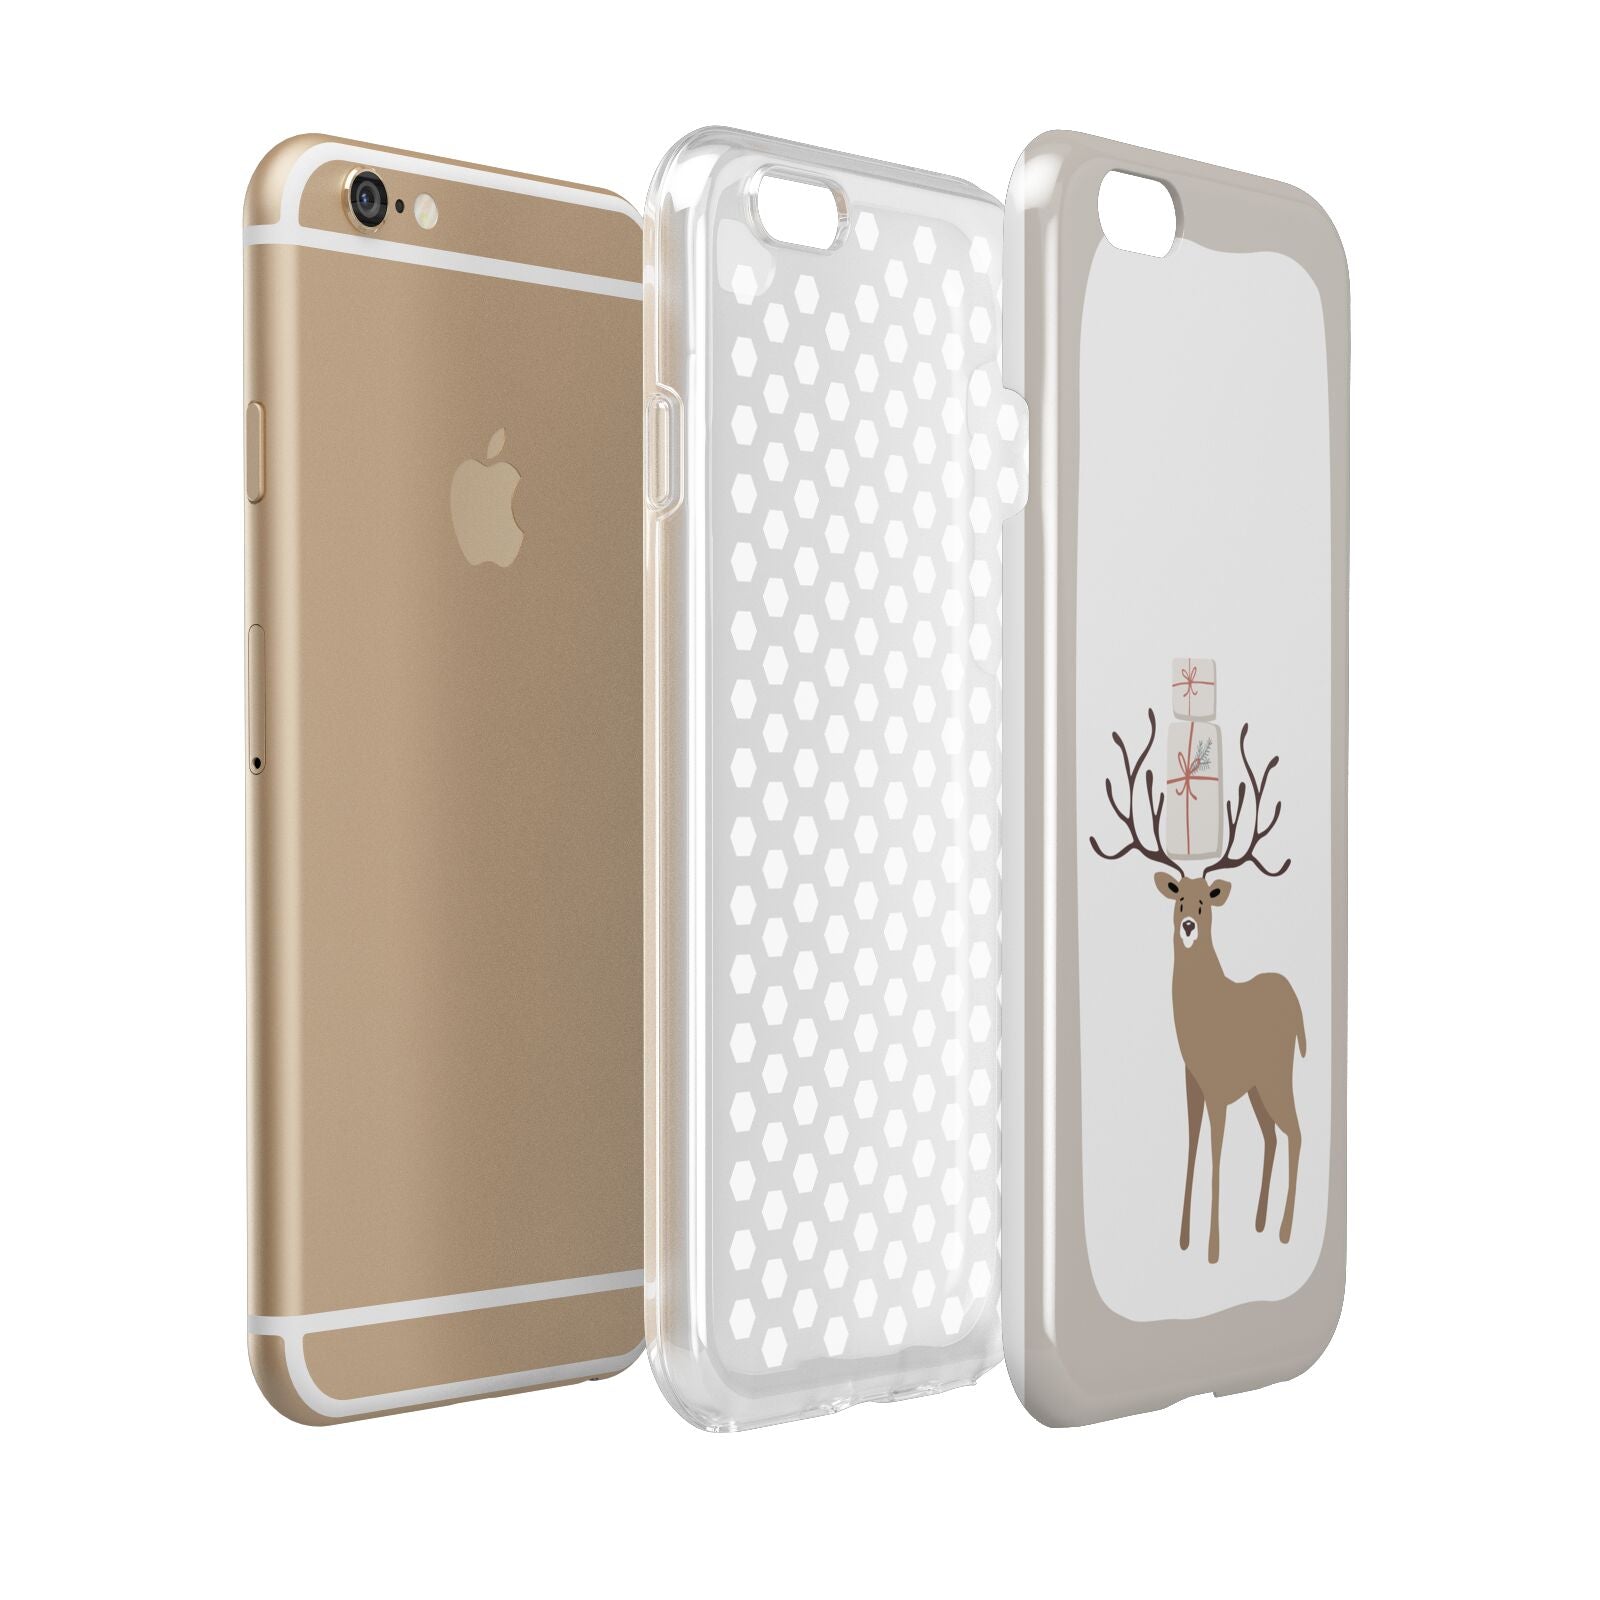 Reindeer Presents Apple iPhone 6 3D Tough Case Expanded view